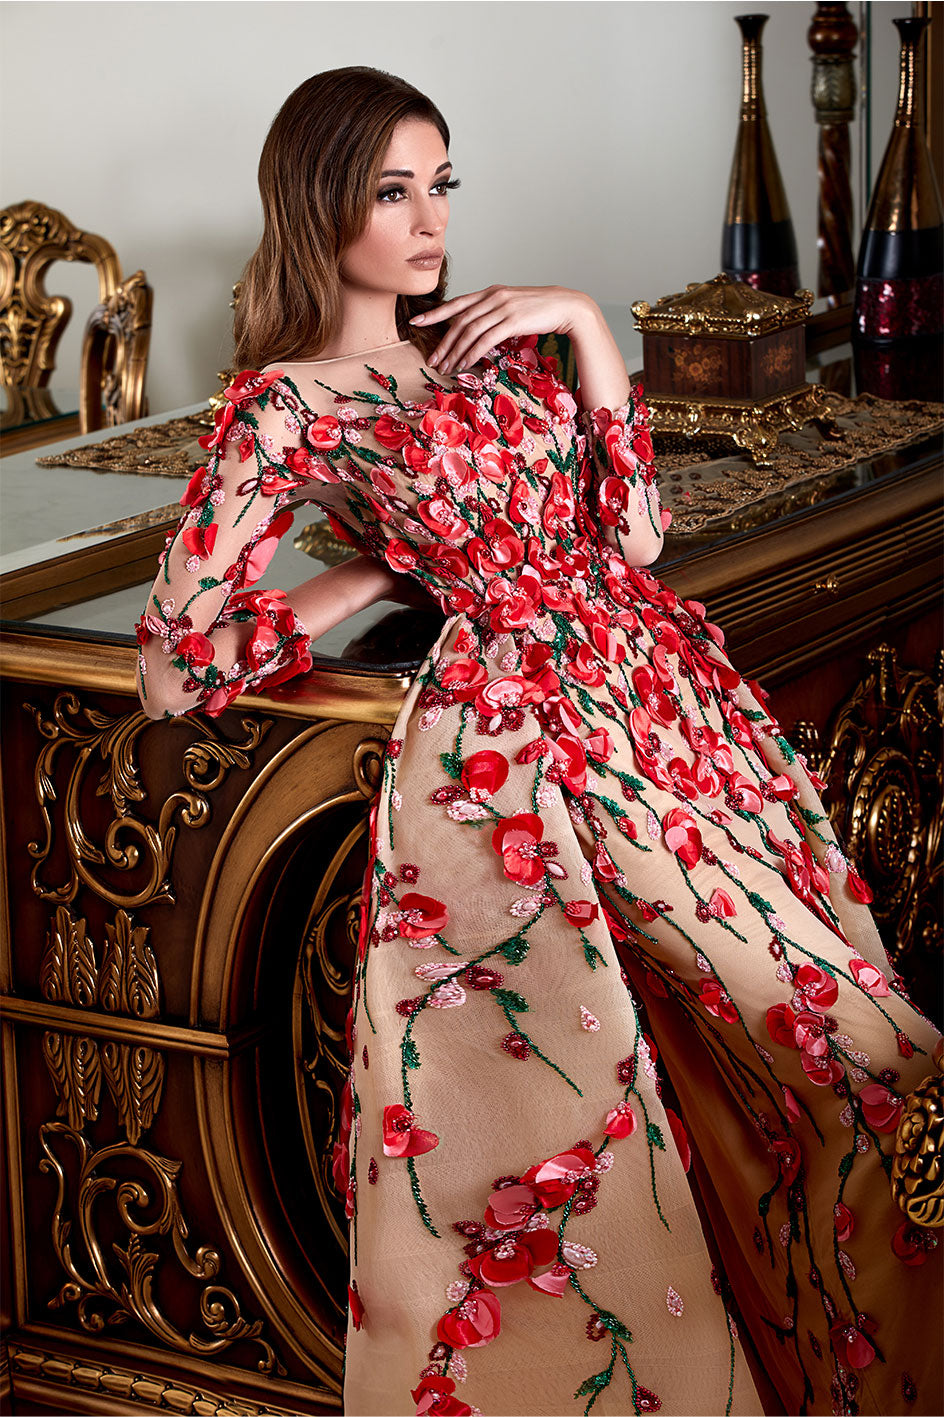 Red Rose Petals Tailored To an A-Line Cut Night Gown